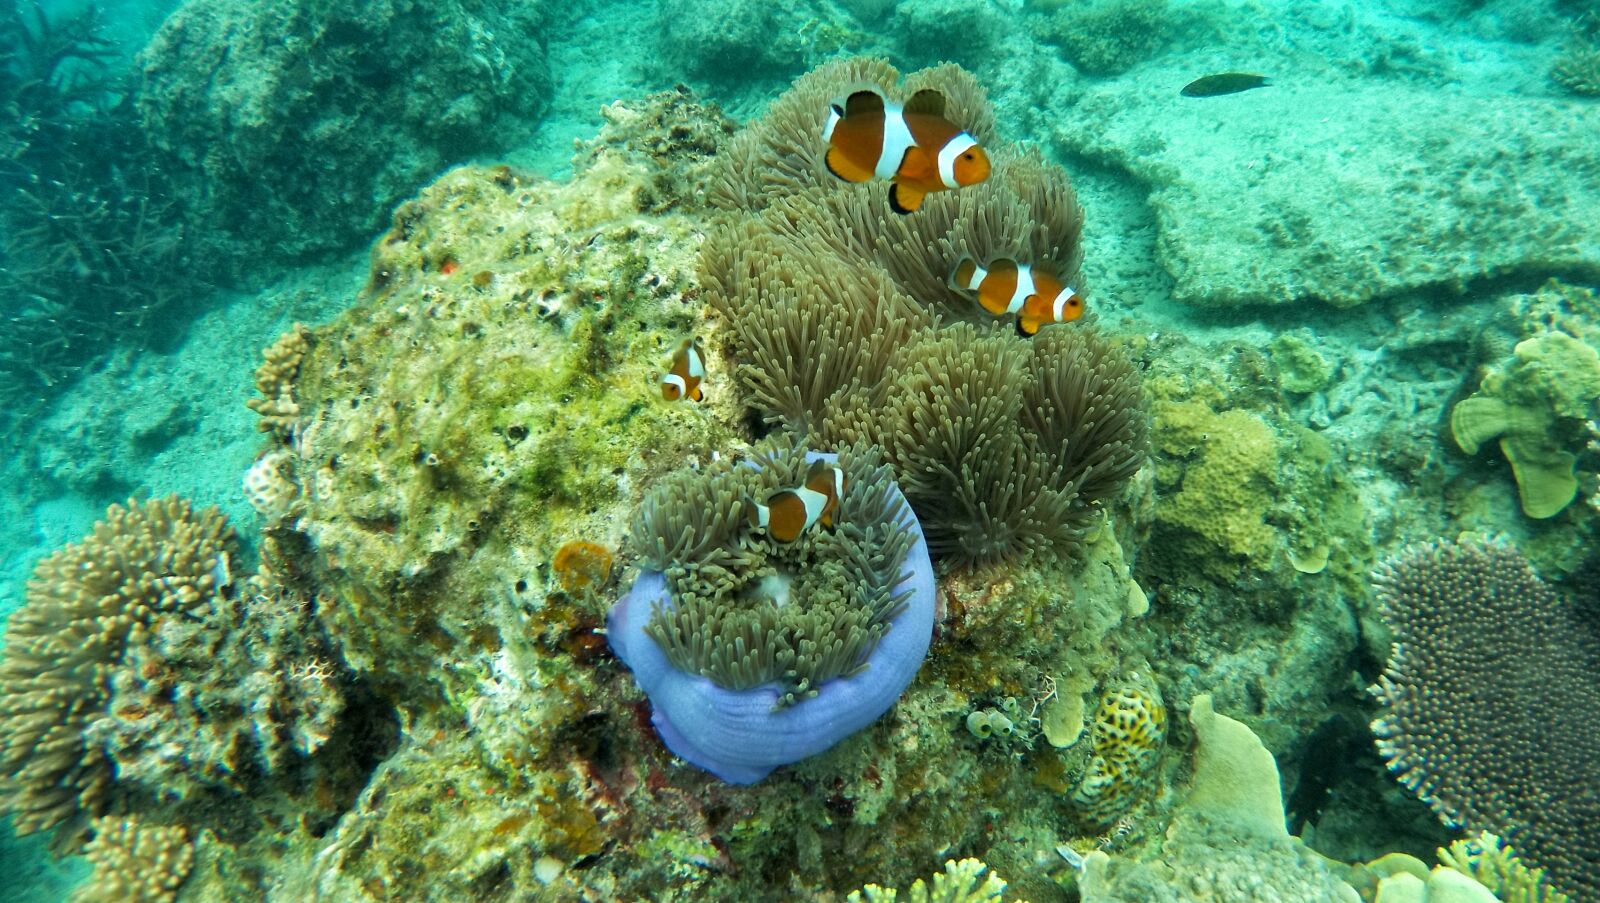 HTC RE sample photo. Clown fish, coral, anemone photography